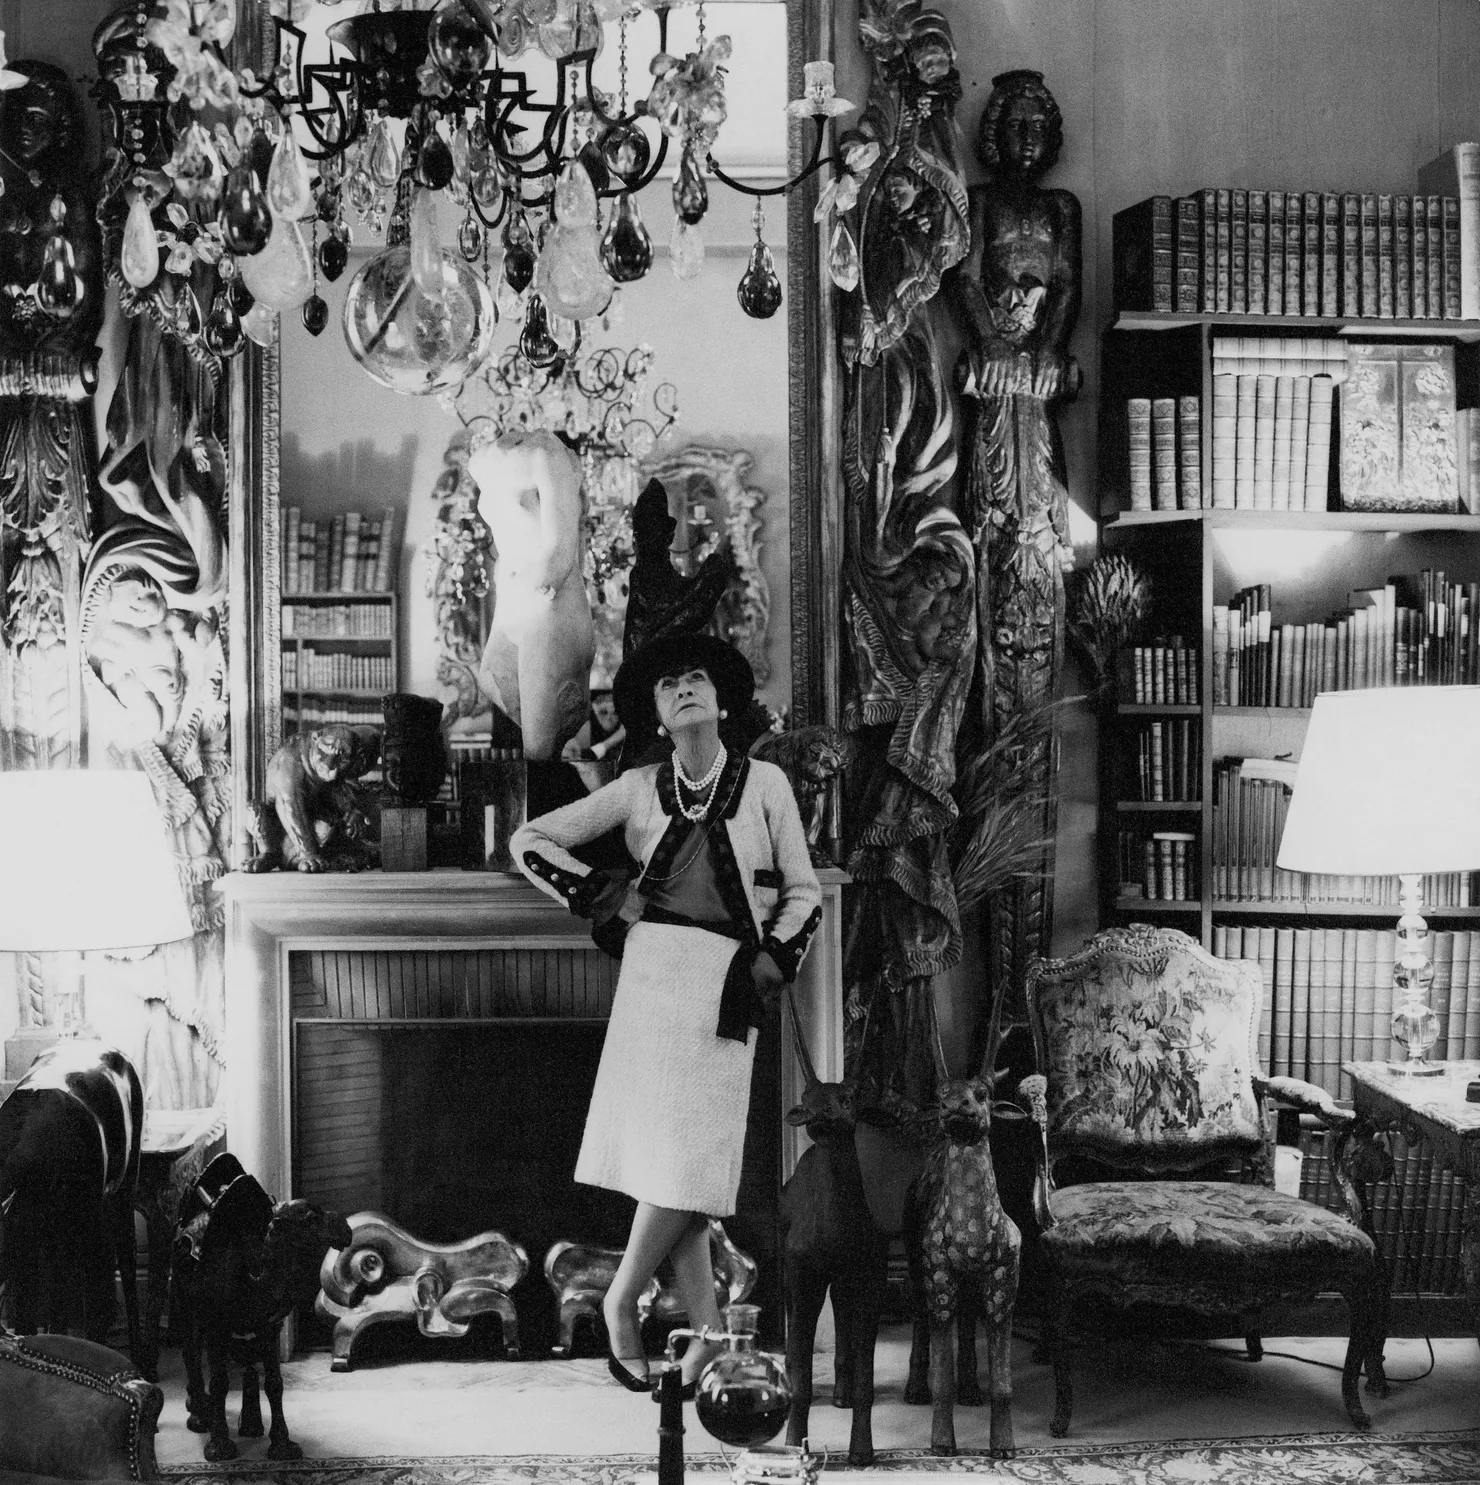 Coco Chanel in her apartment - hotel room at the Ritz in Paris, France